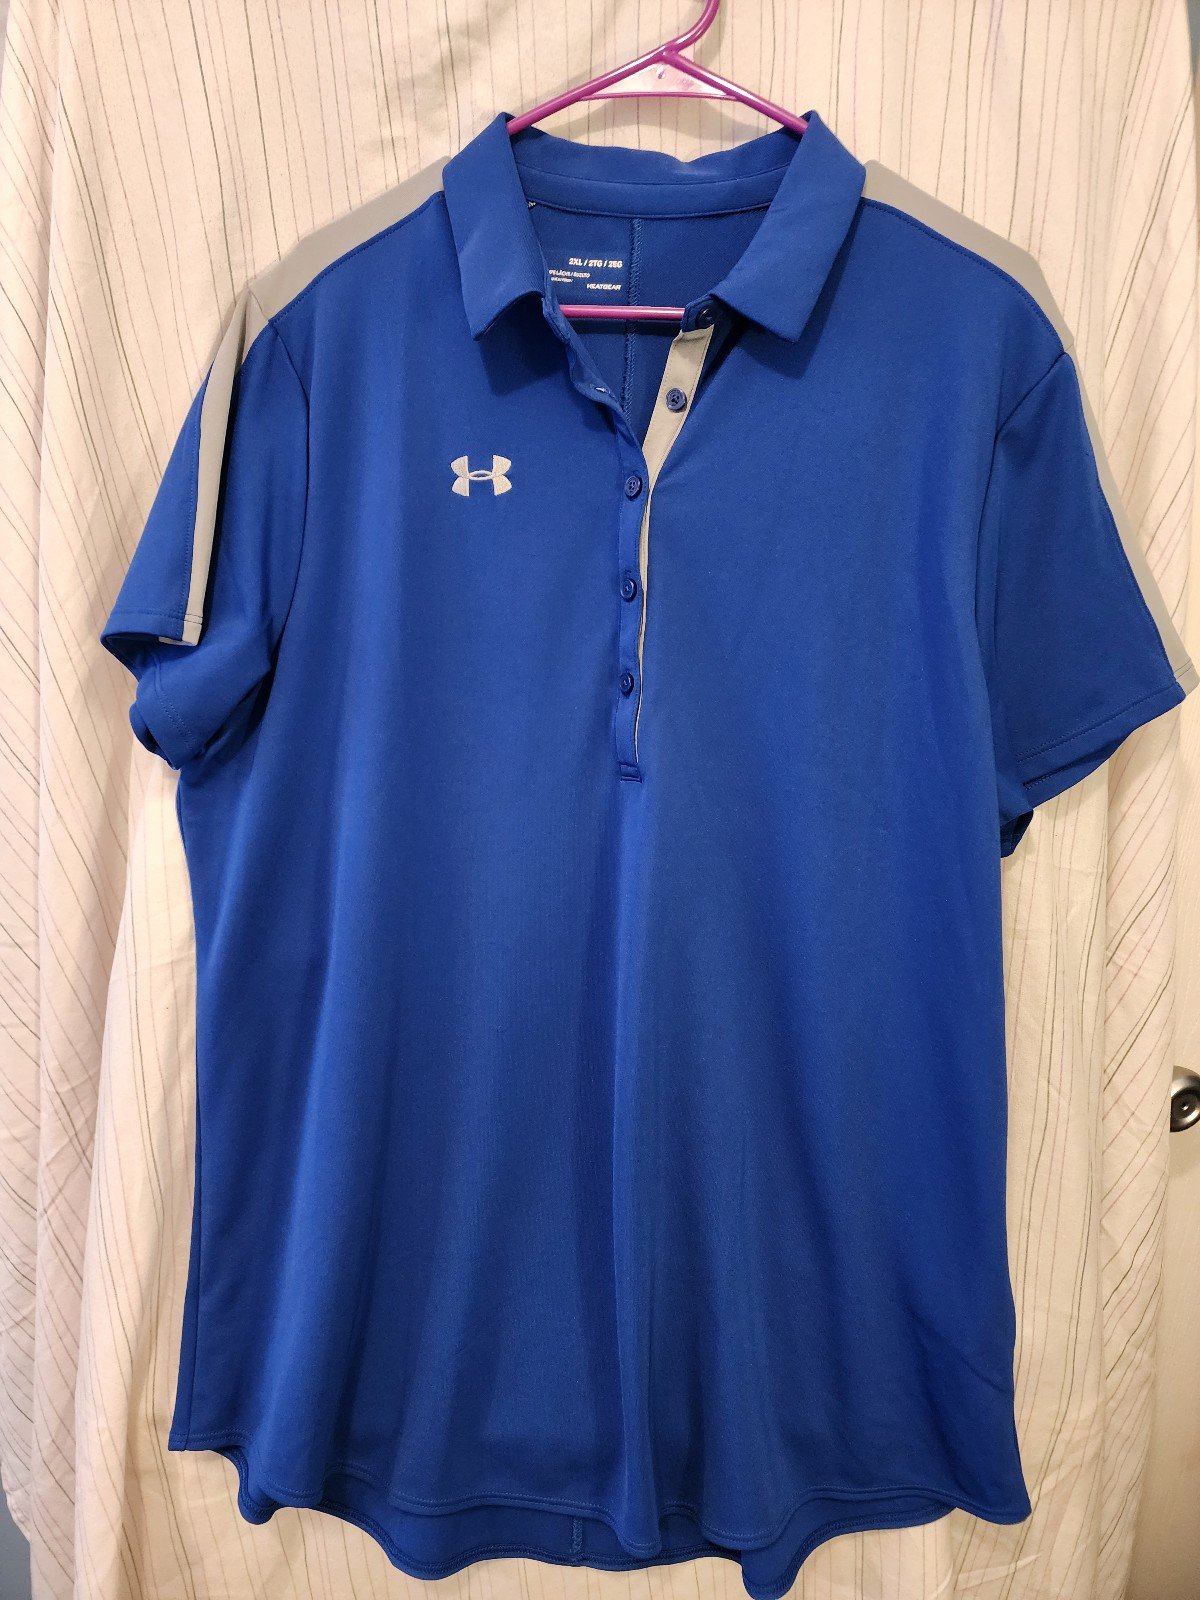 Fashion Womens Under Armour shirt, NEW with tags k9MwSG